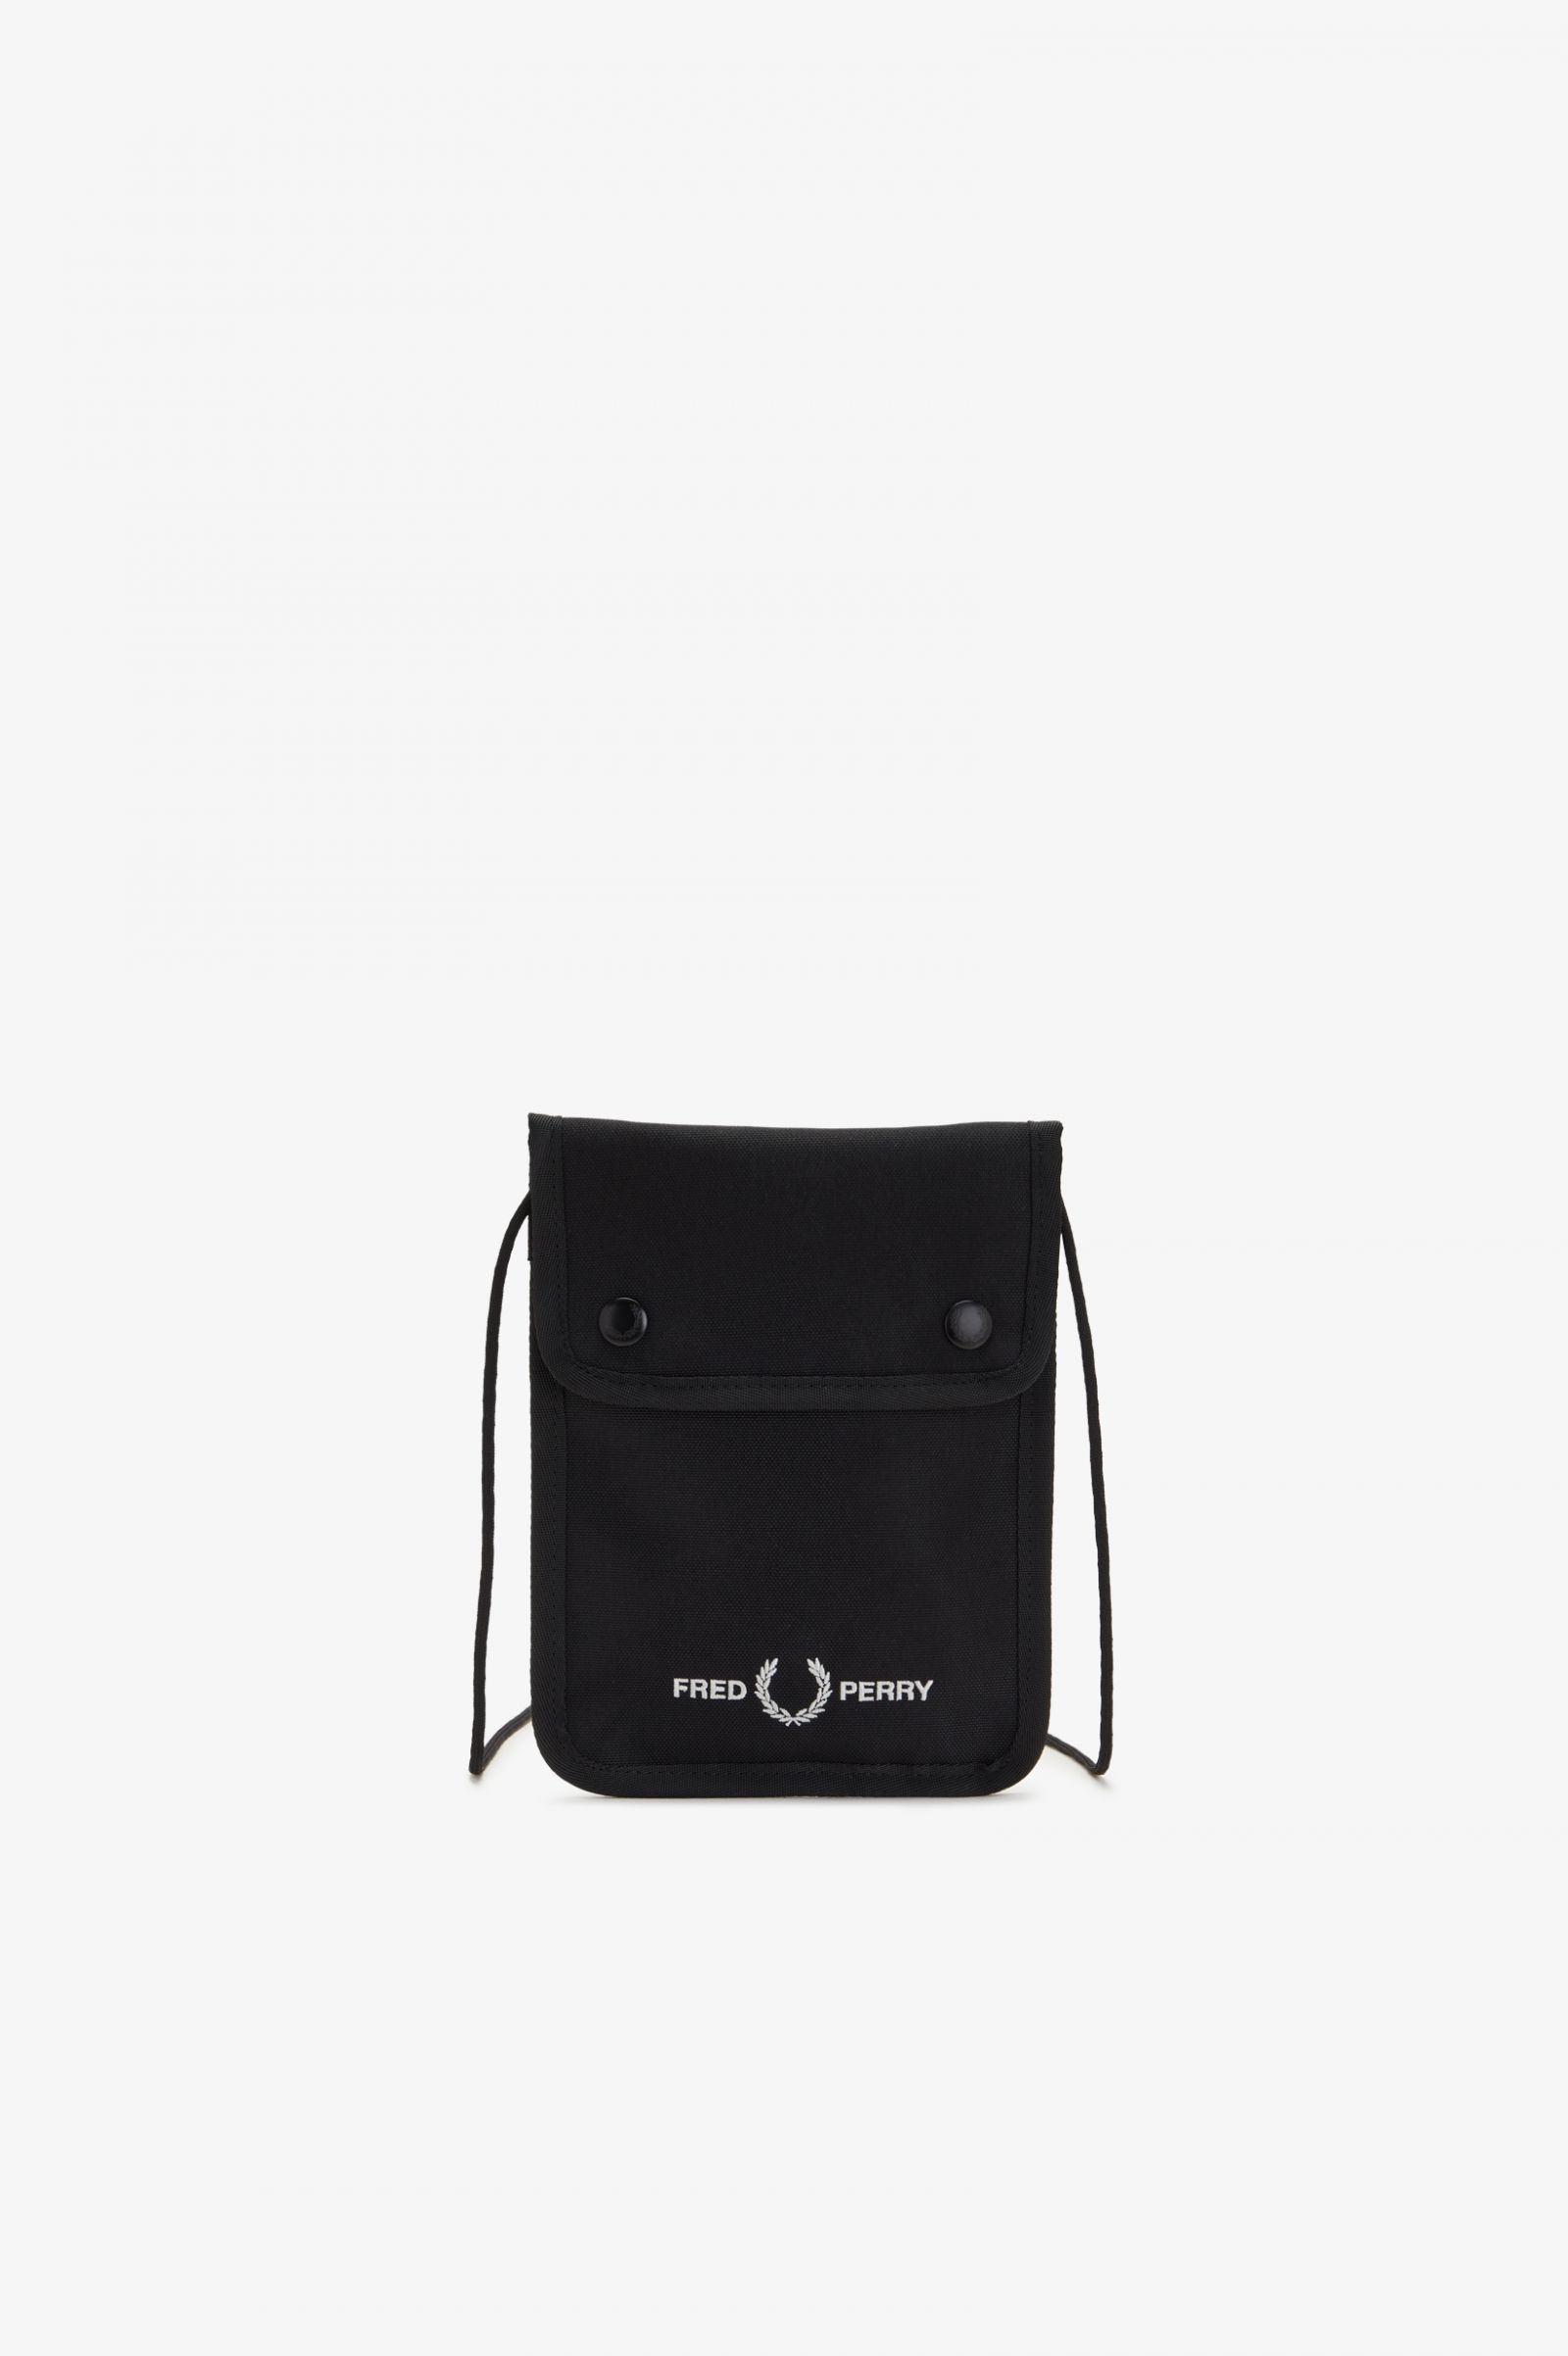 Fred Perry Branded Pouch in Black